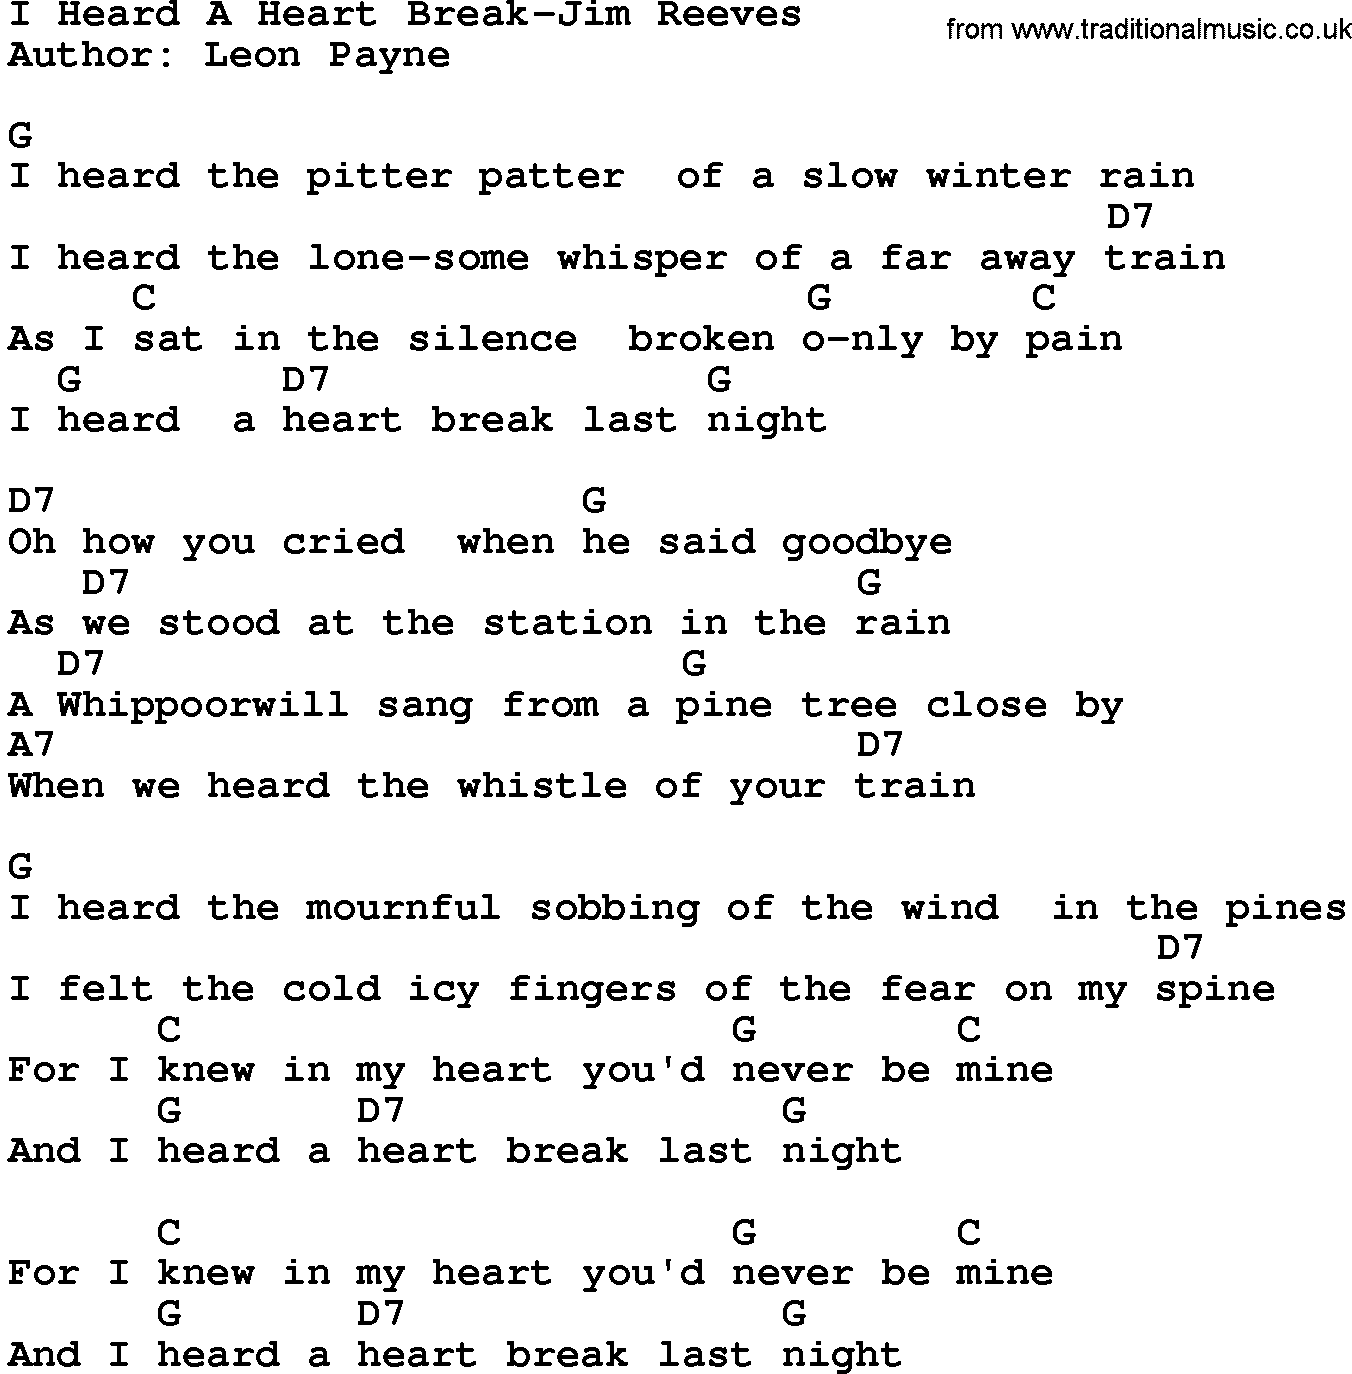 Country music song: I Heard A Heart Break-Jim Reeves lyrics and chords